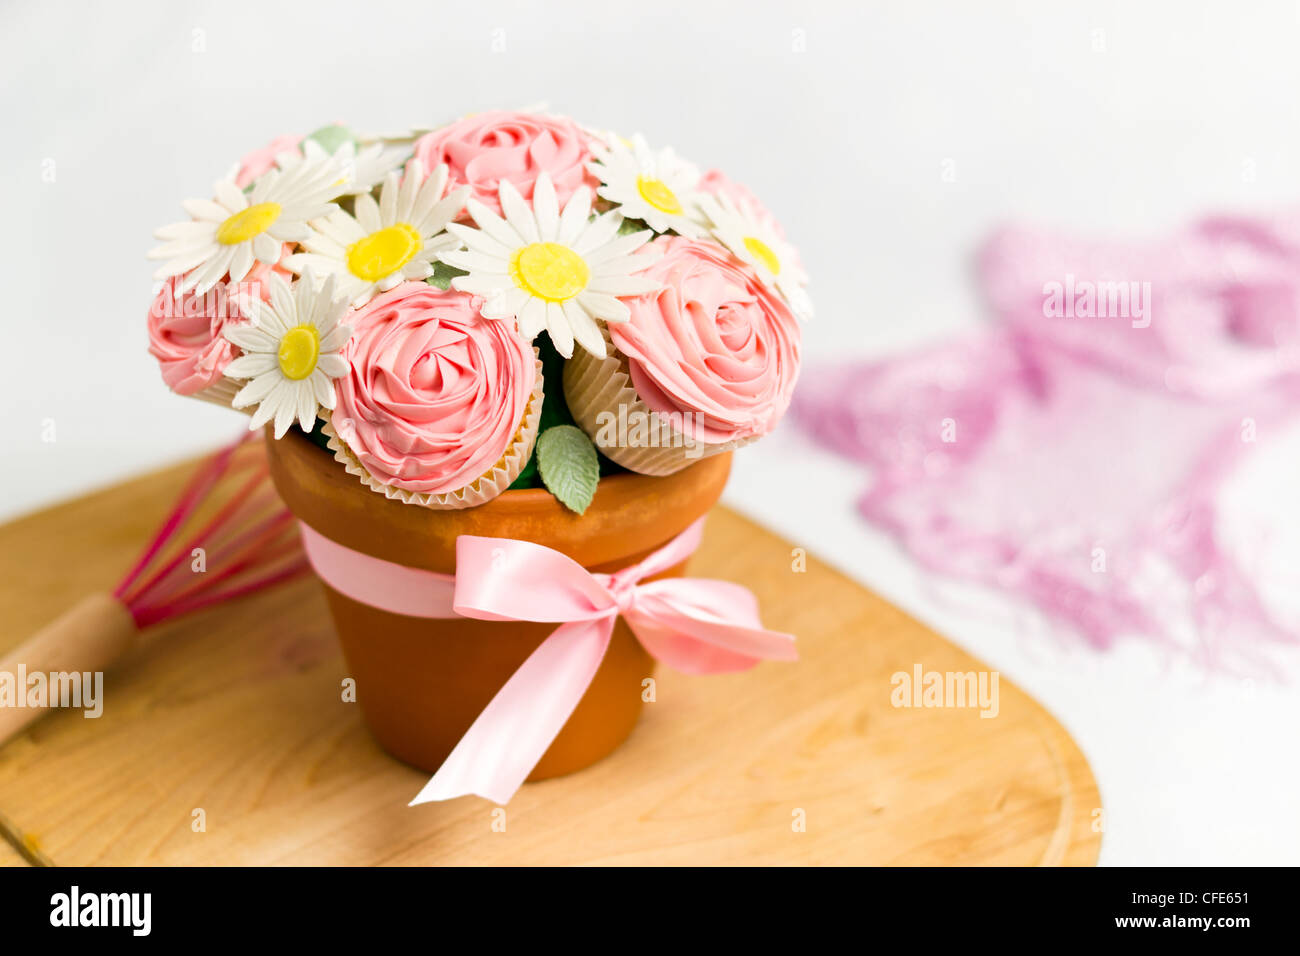 Picture of cupcakes made into a cupcake bouquet Stock Photo